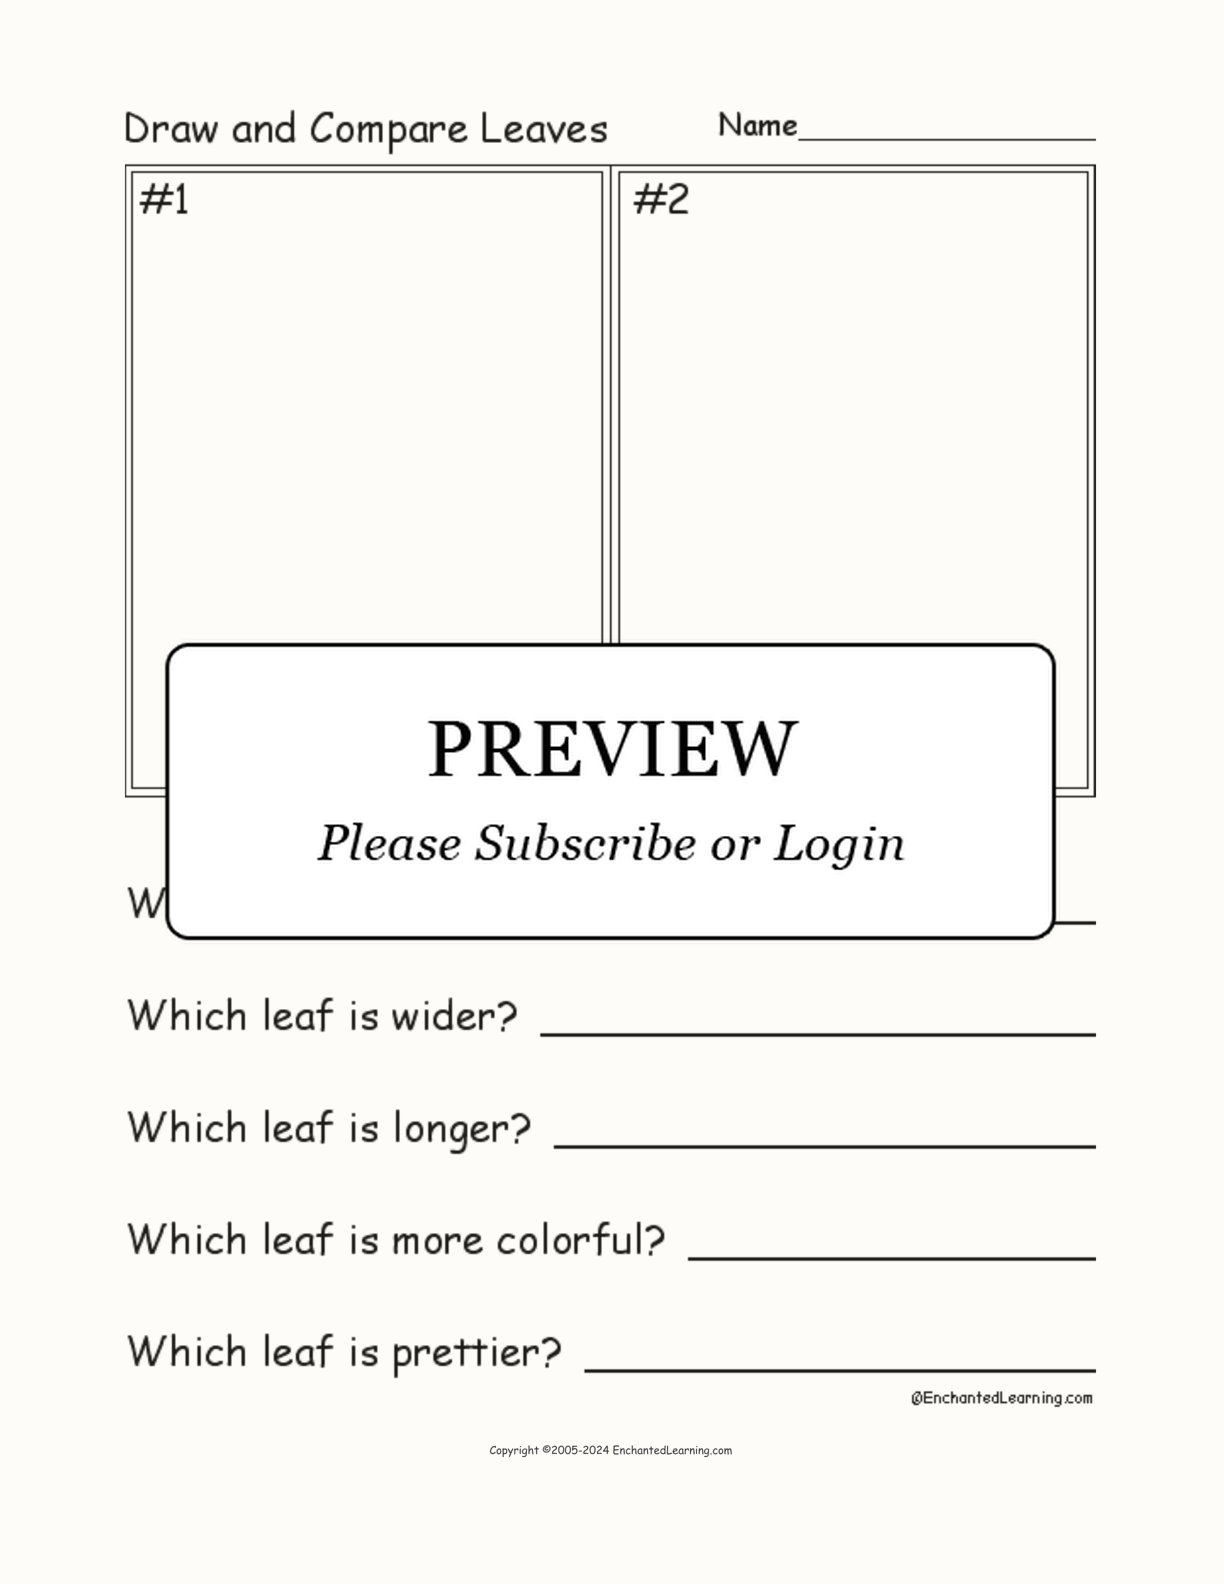 Draw and Compare Leaves interactive worksheet page 1